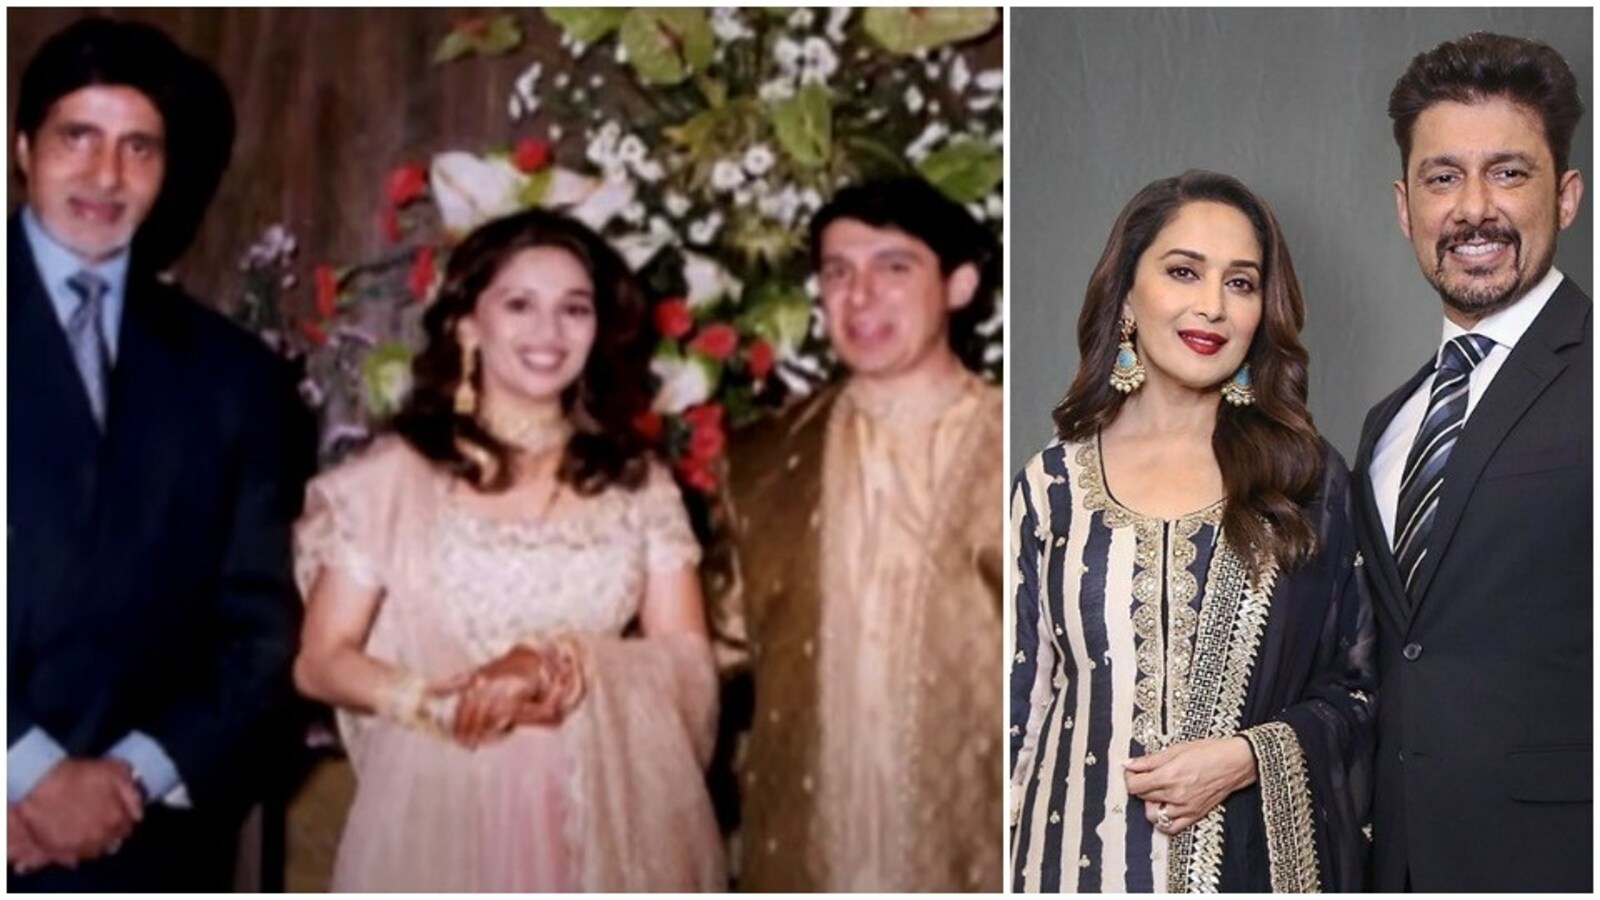 When Madhuri Dixit revealed Shriram Nene could only identify Amitabh Bachchan at wedding party; said, ‘I know that face’